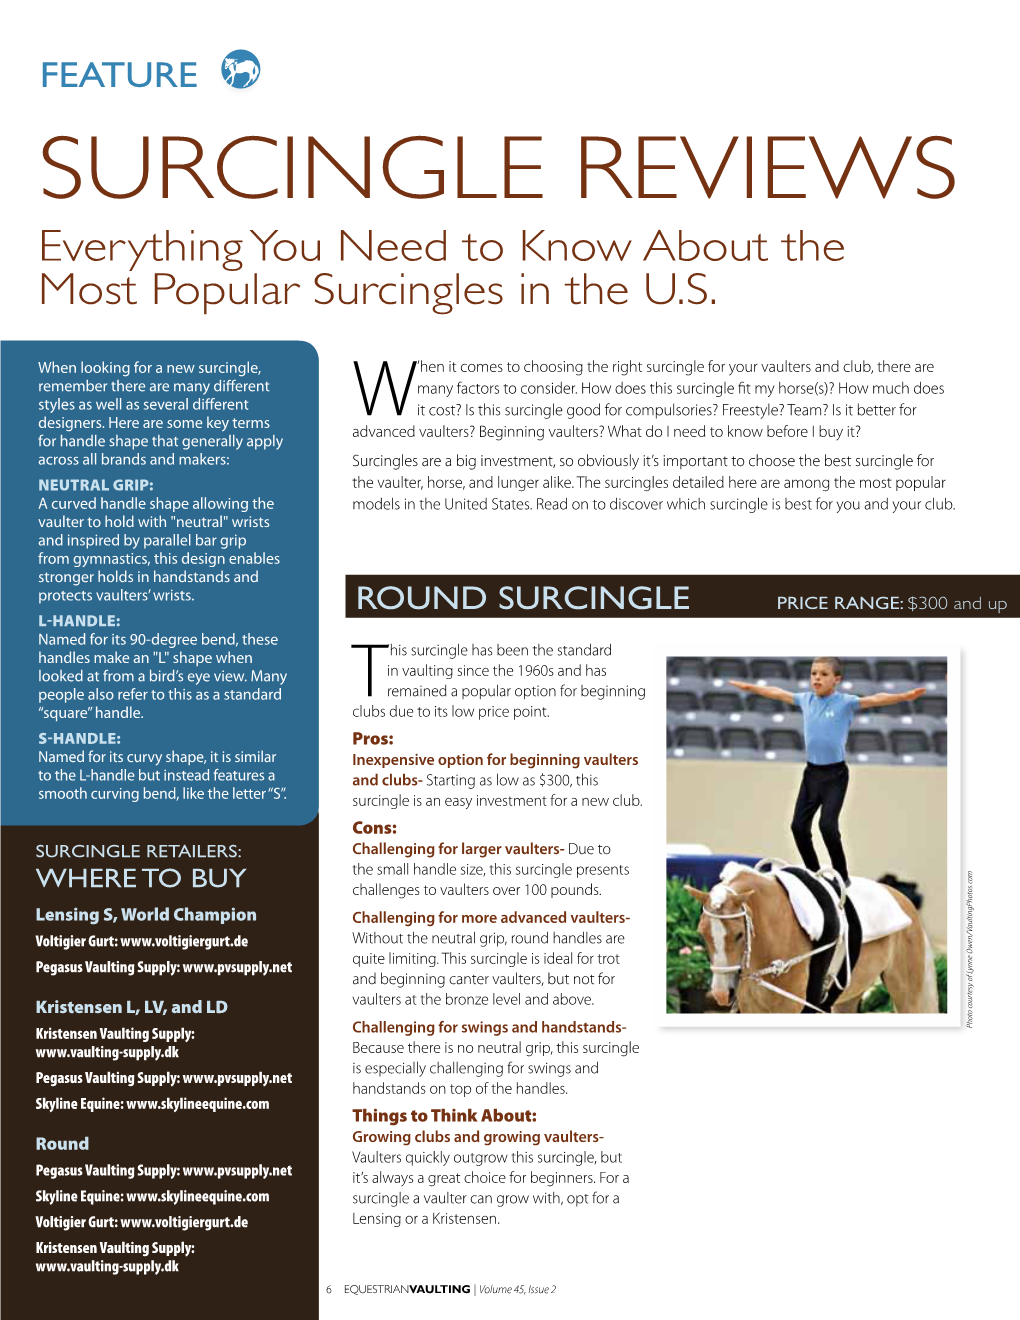 SURCINGLE REVIEWS Everything You Need to Know About the Most Popular Surcingles in the U.S